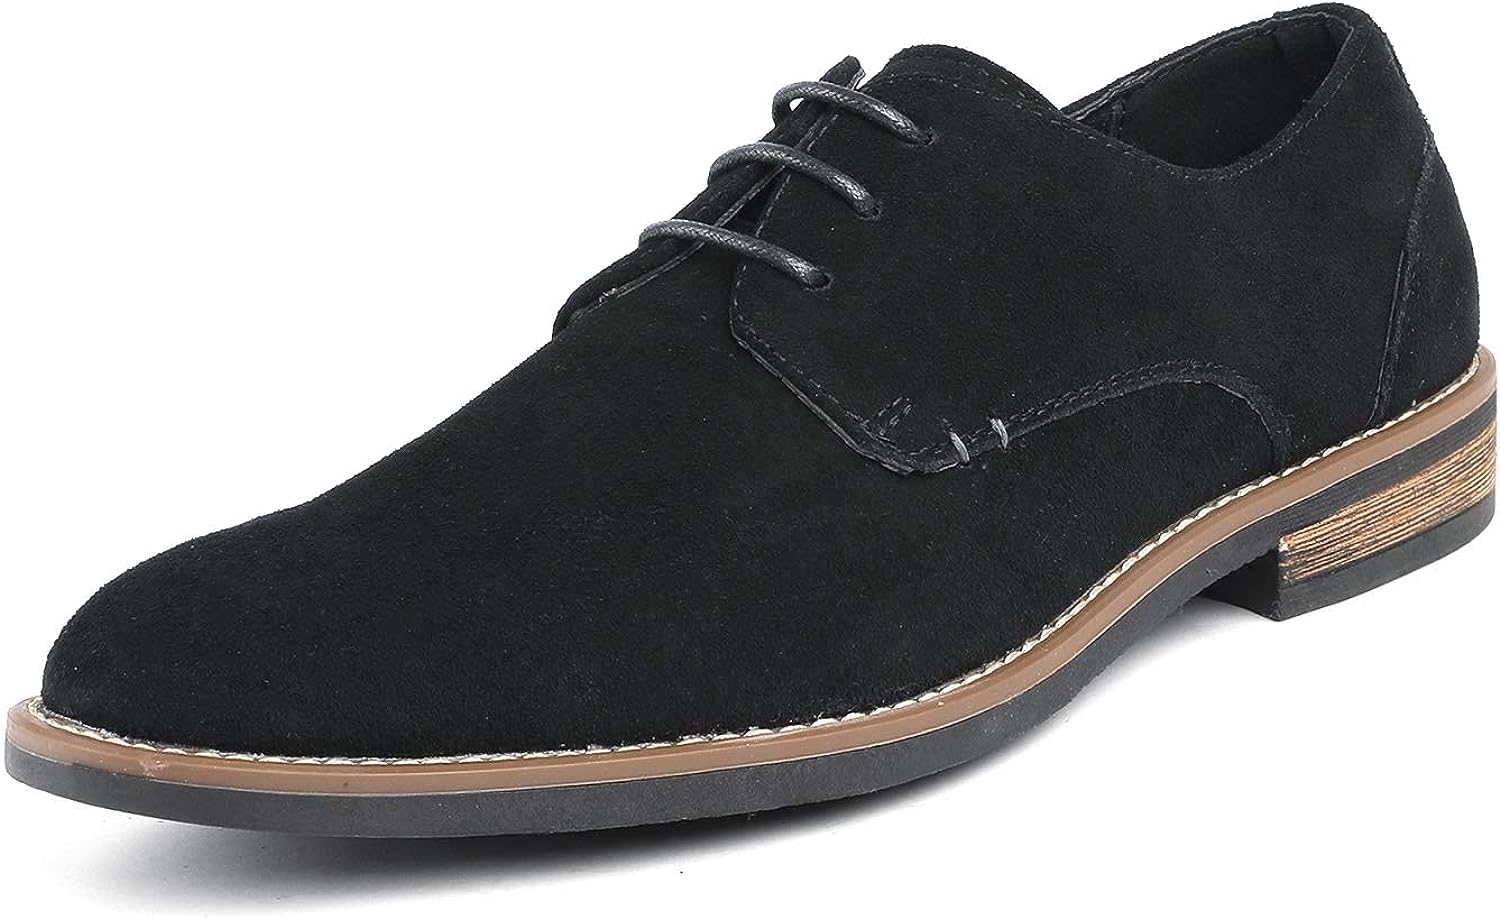 Bruno Marc Men's Urban Suede Leather Lace Up Oxfords Shoes